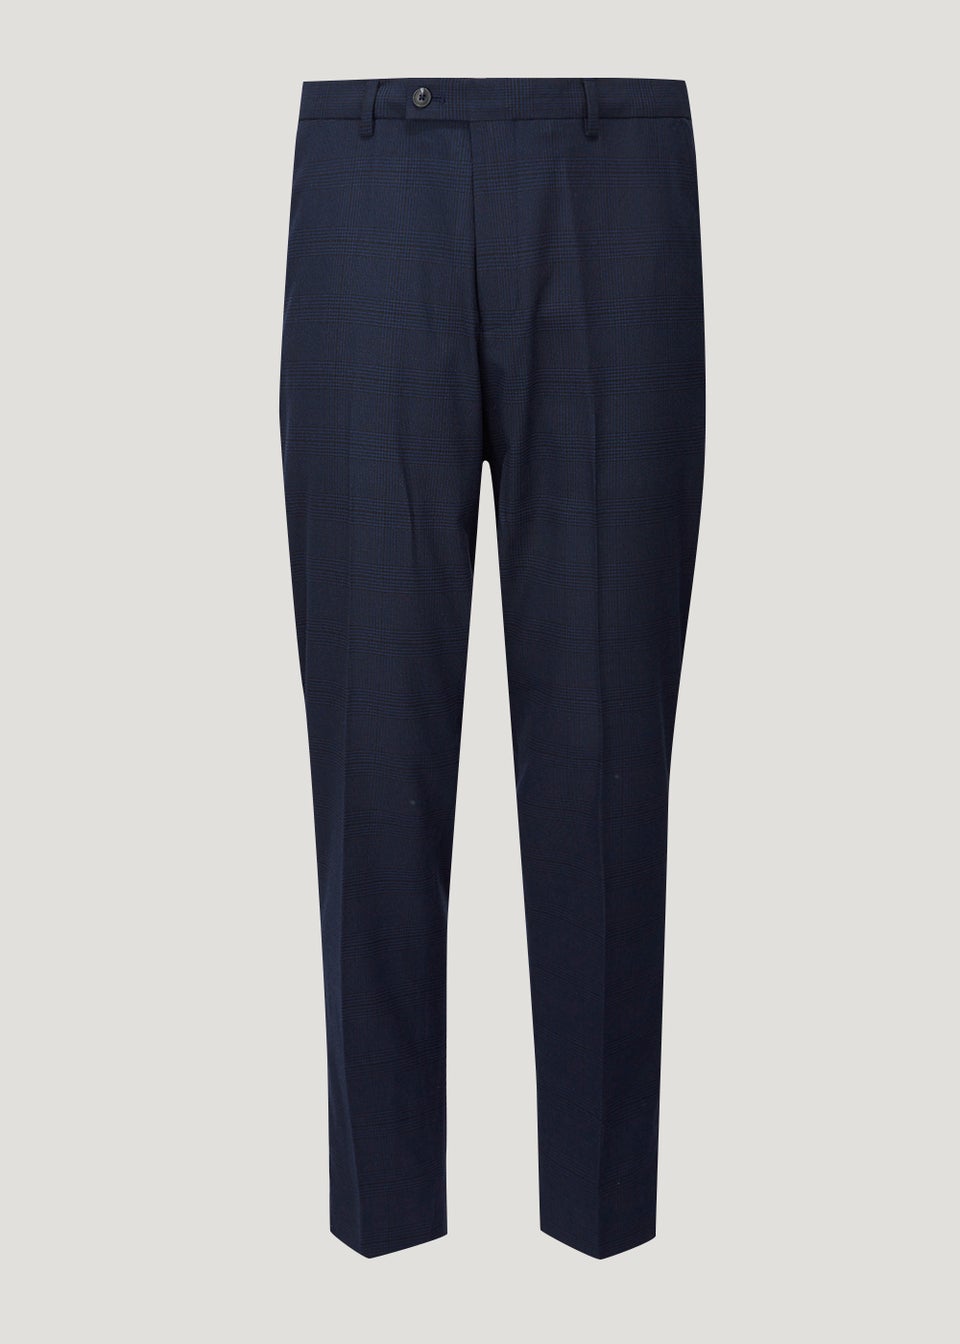 Taylor & Wright Orwell Navy Tailored Fit Suit Trousers